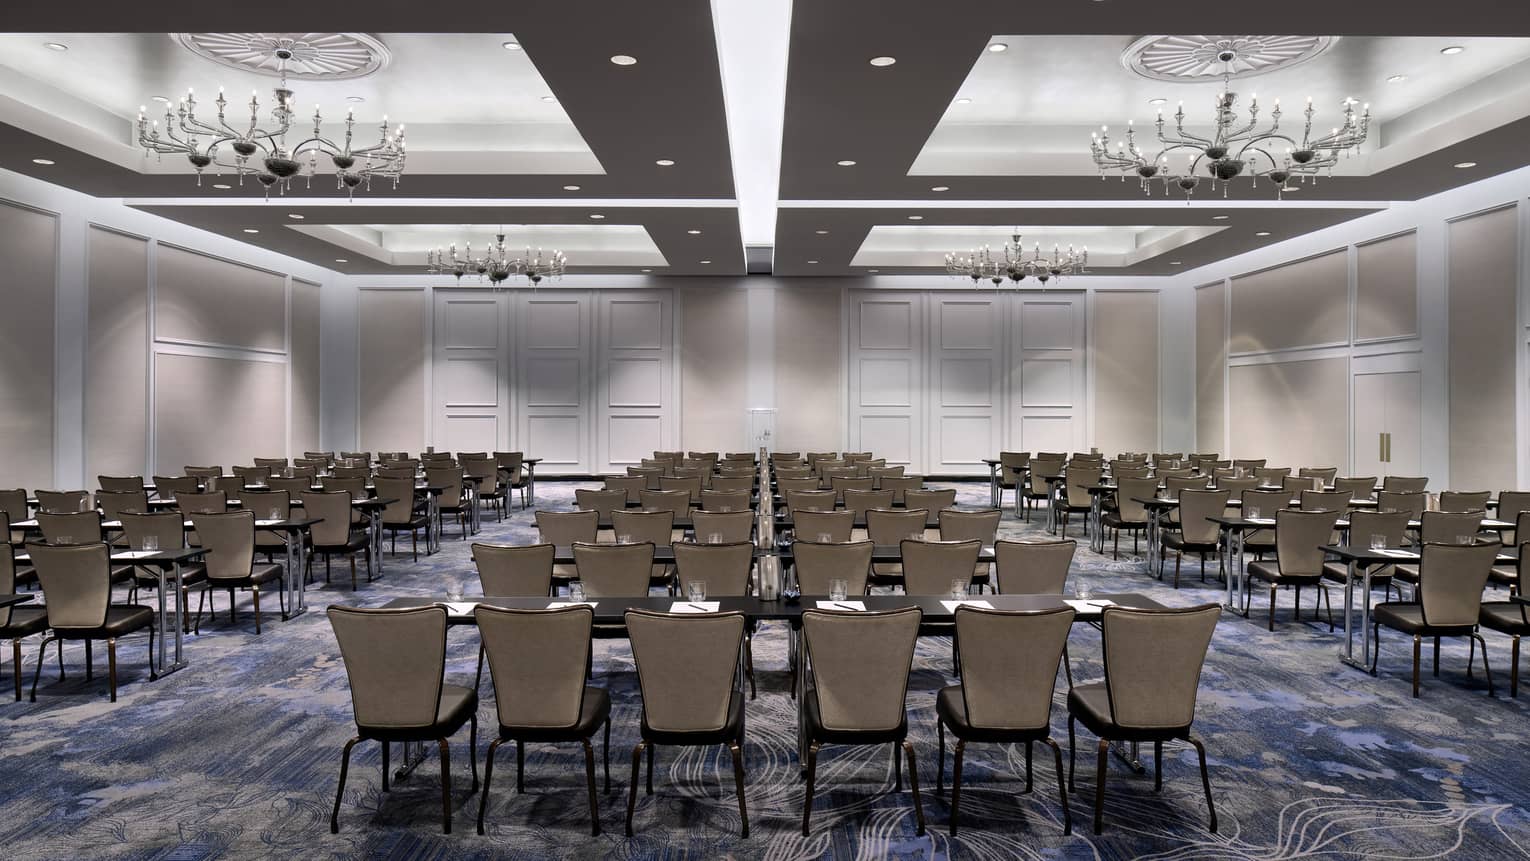 Large ballroom with inset ceilings, recessed lighting, and chandeliers, with several rows of tables and chairs